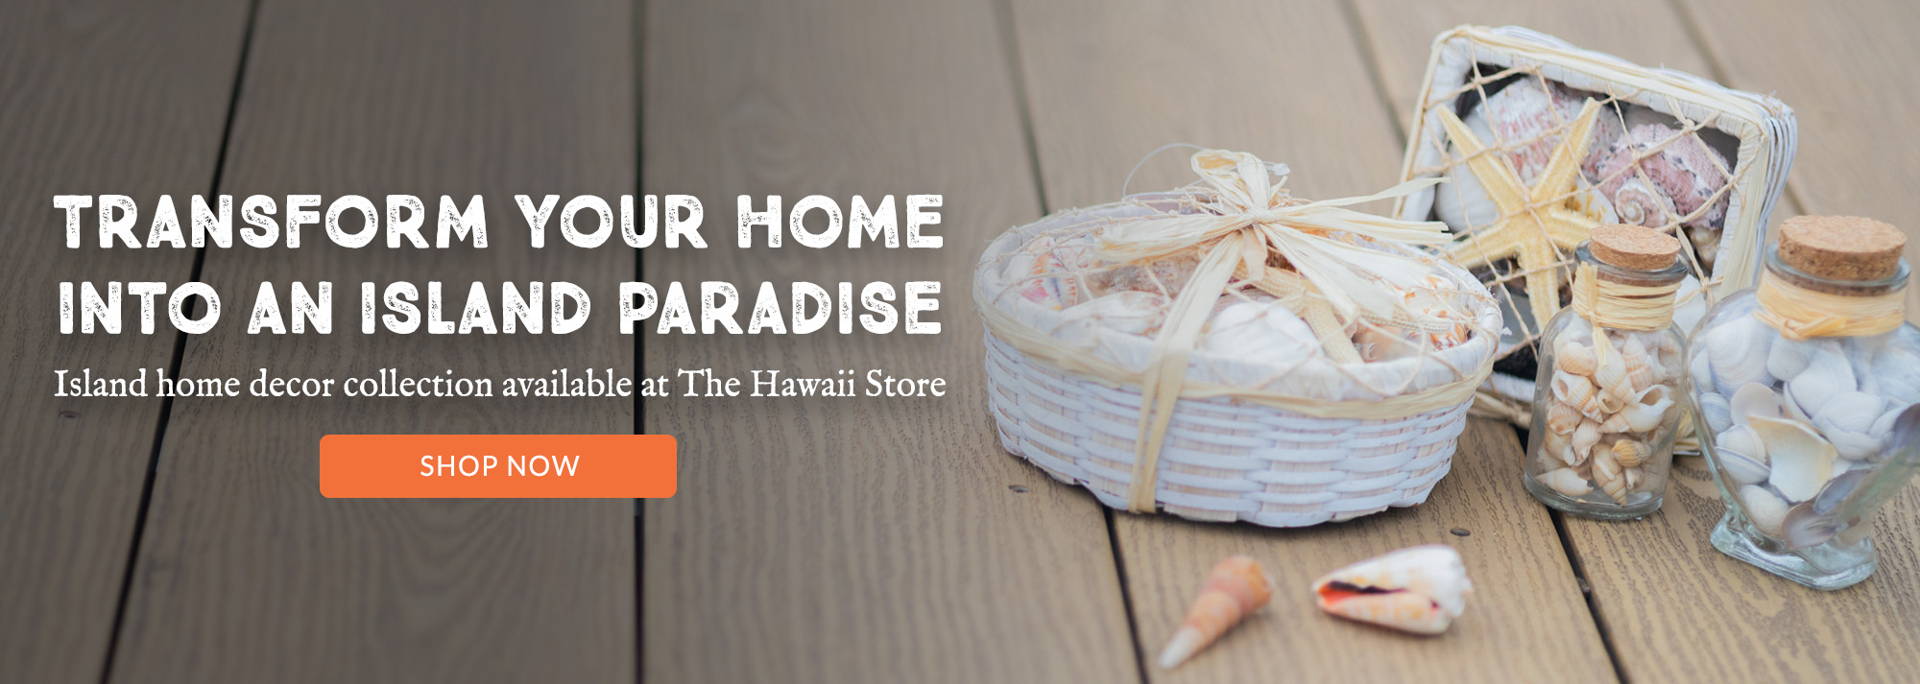 Transform your home into an island paradise!